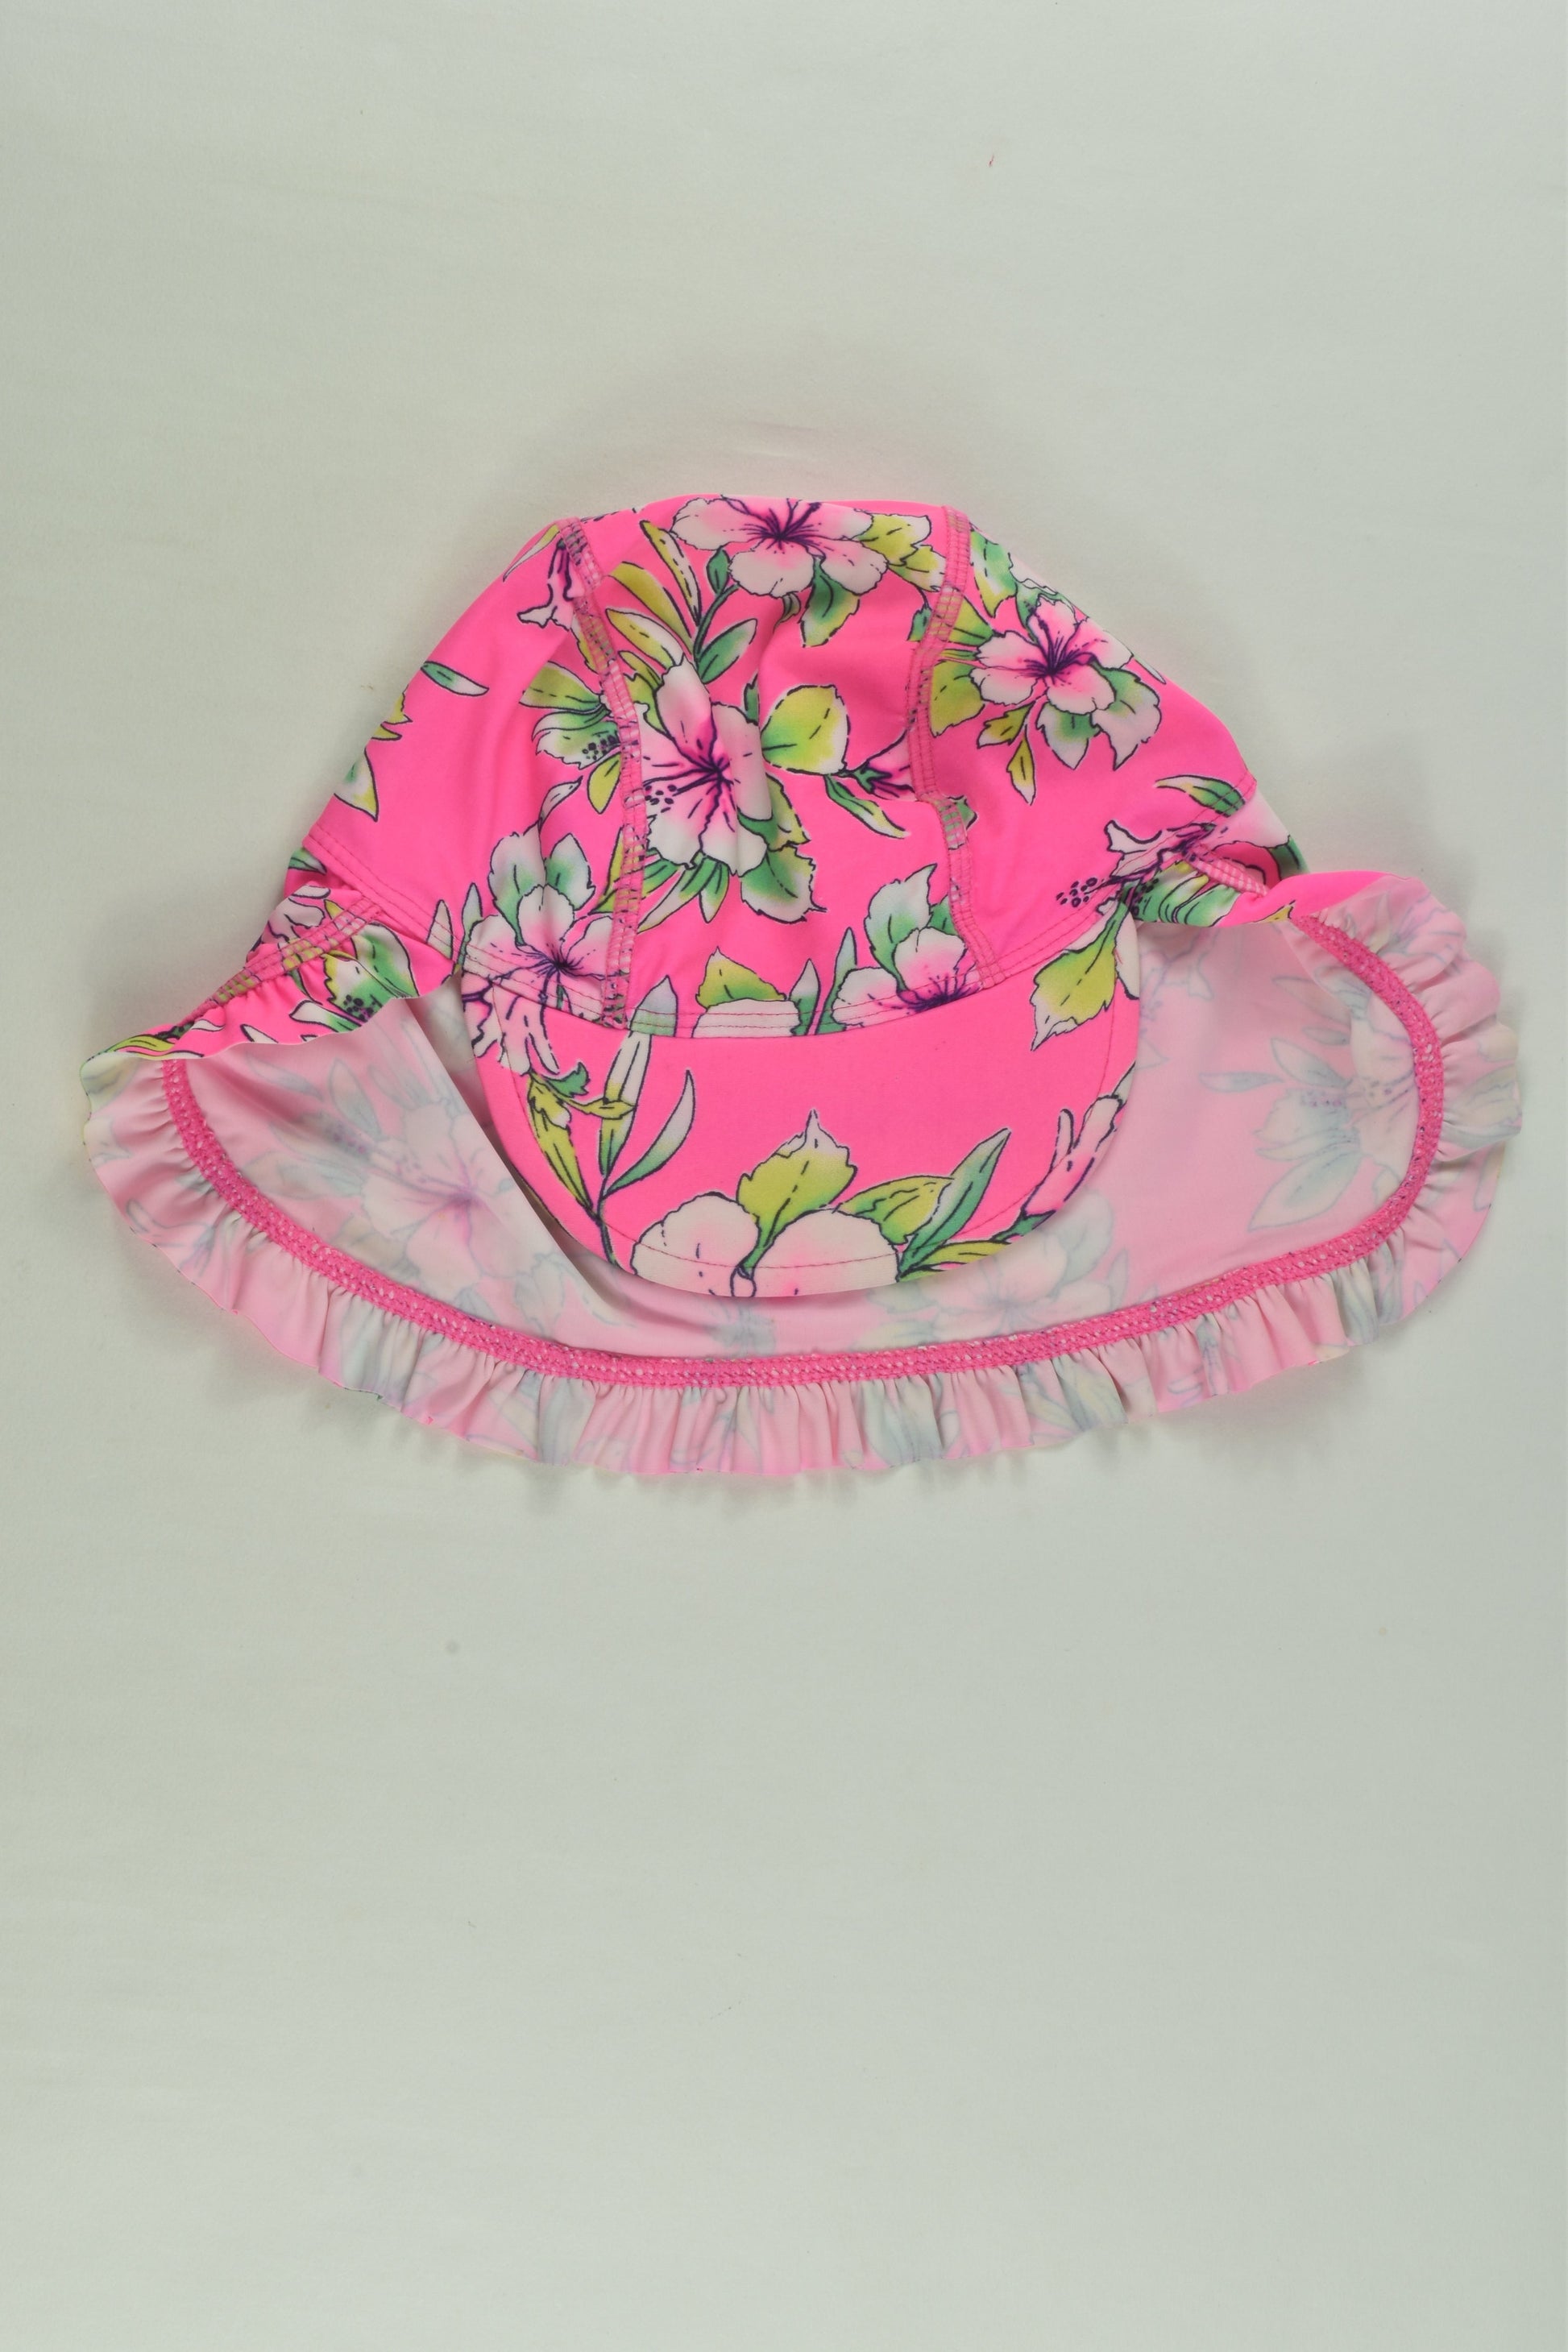 Pumpkin Patch Size approx 4-8 years Floral Beach Hat